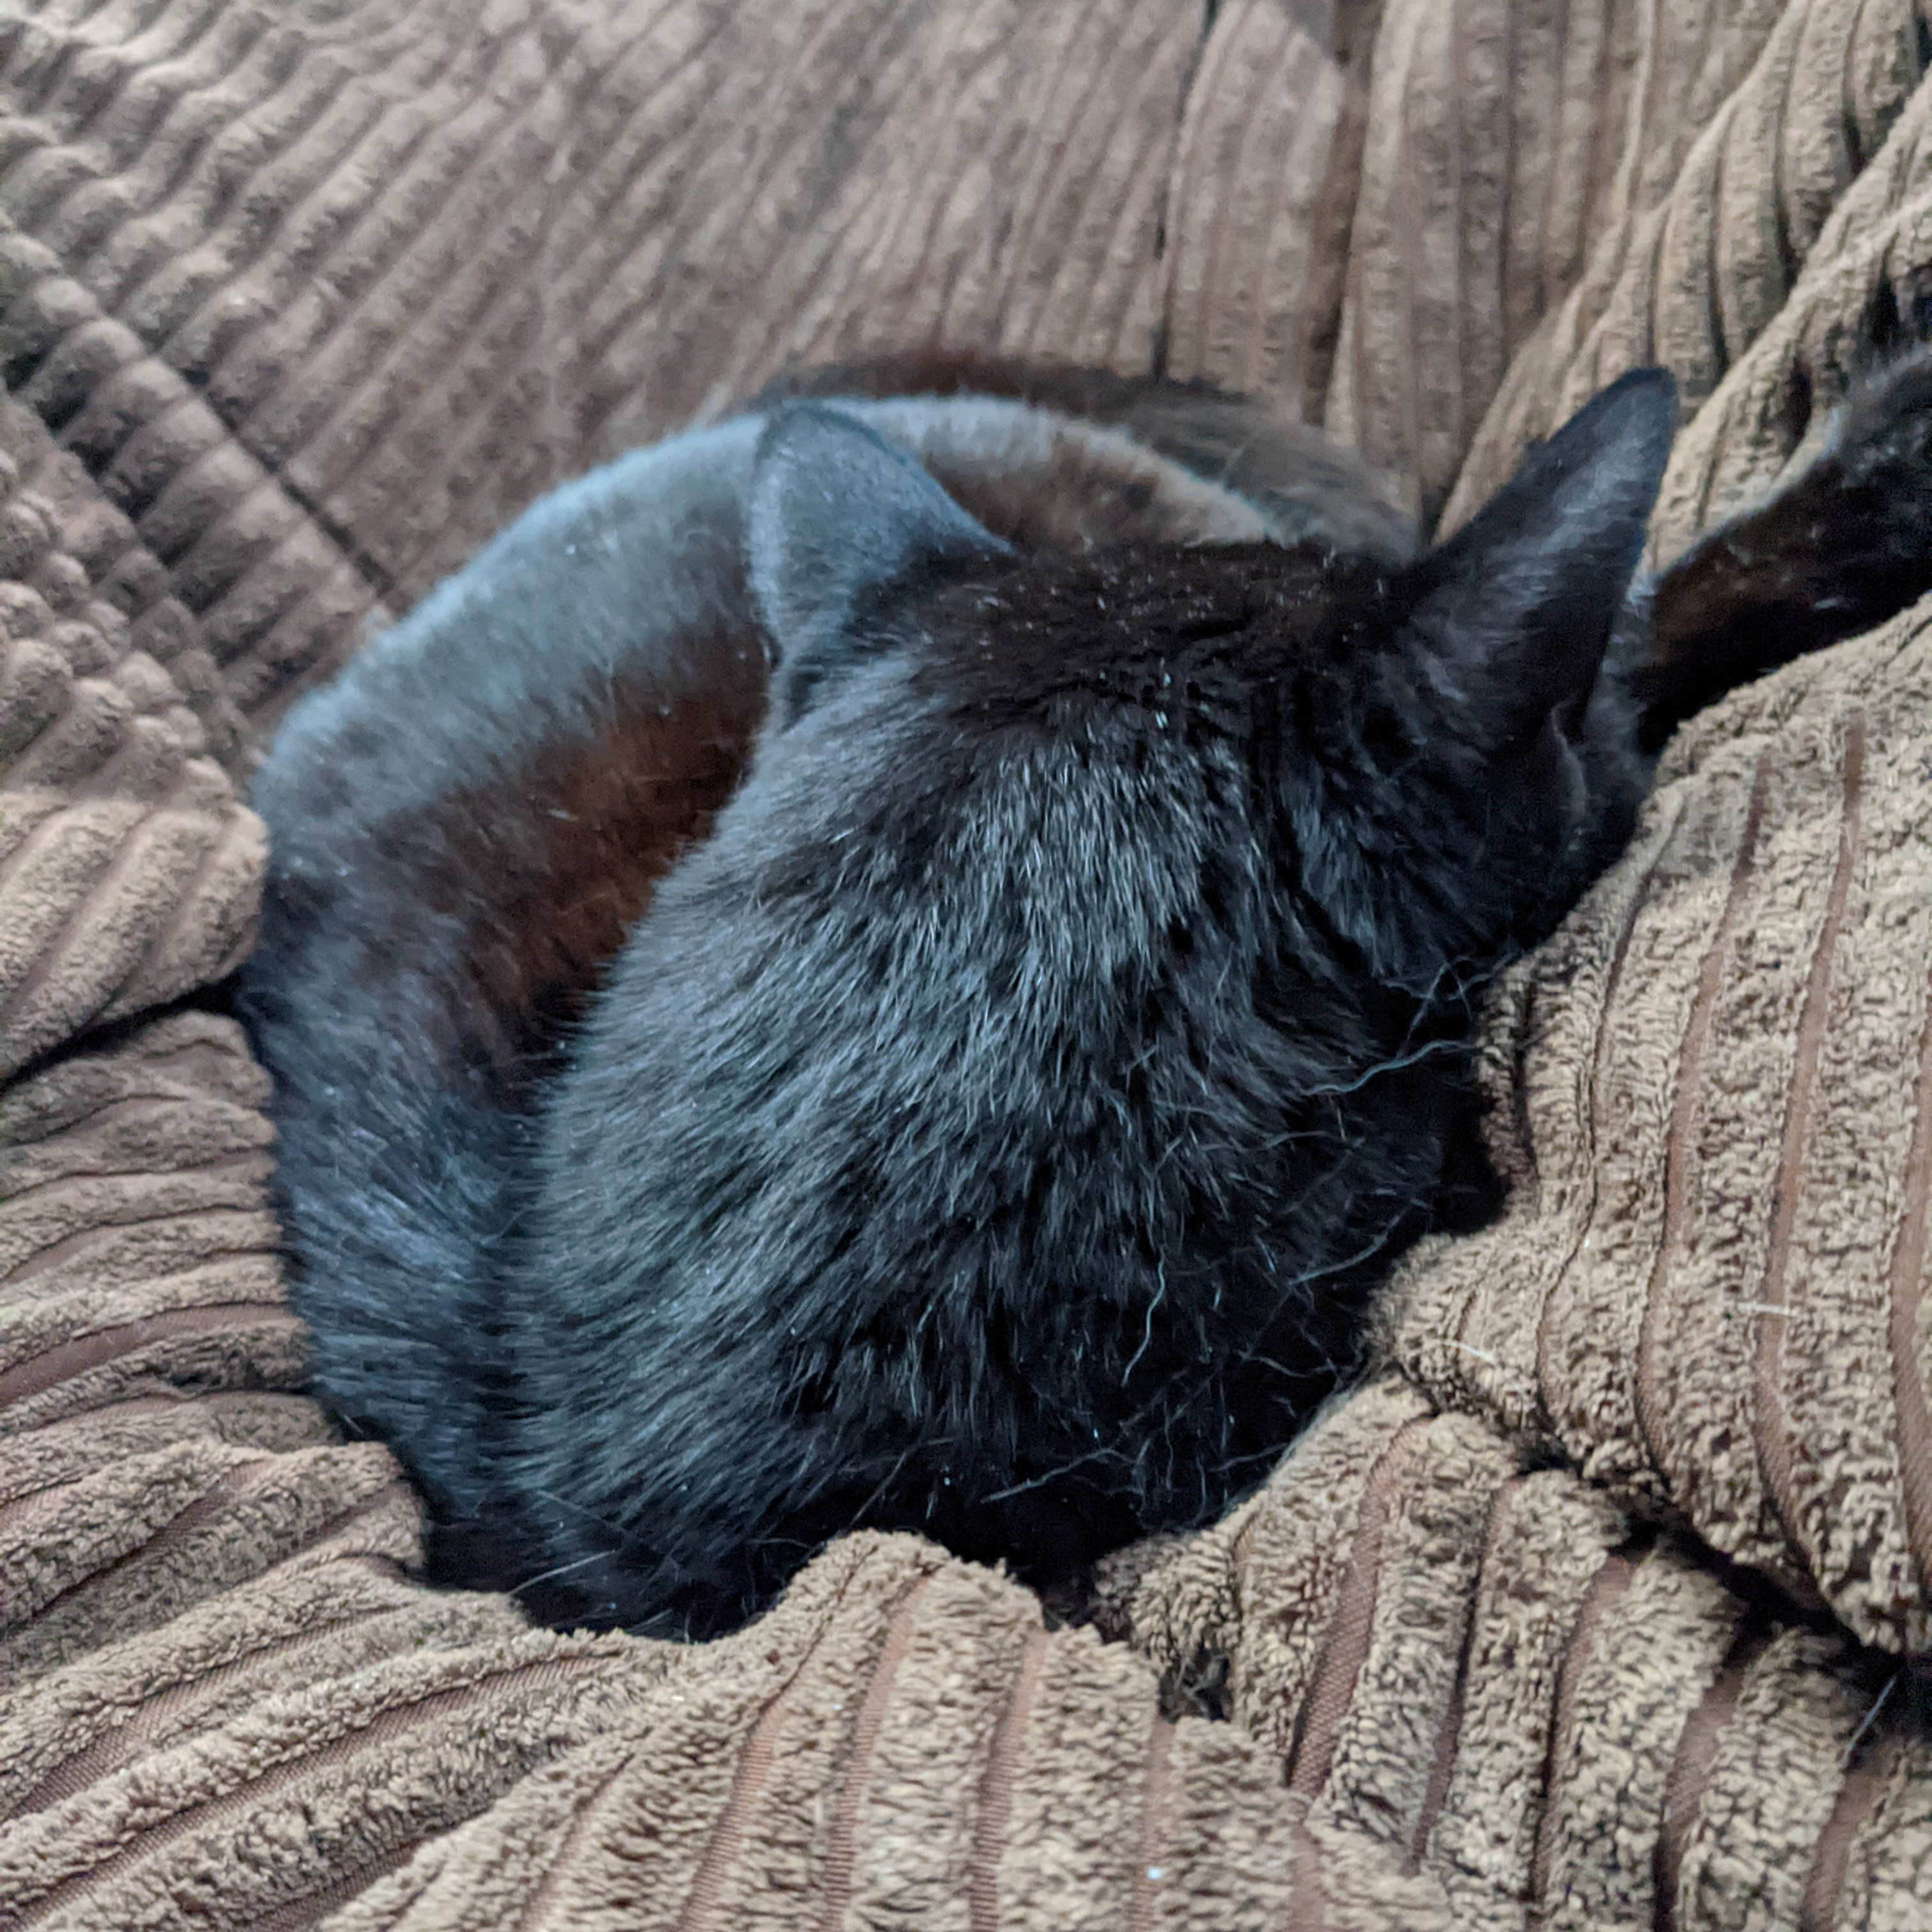 Lincoln the cat curled in a ball